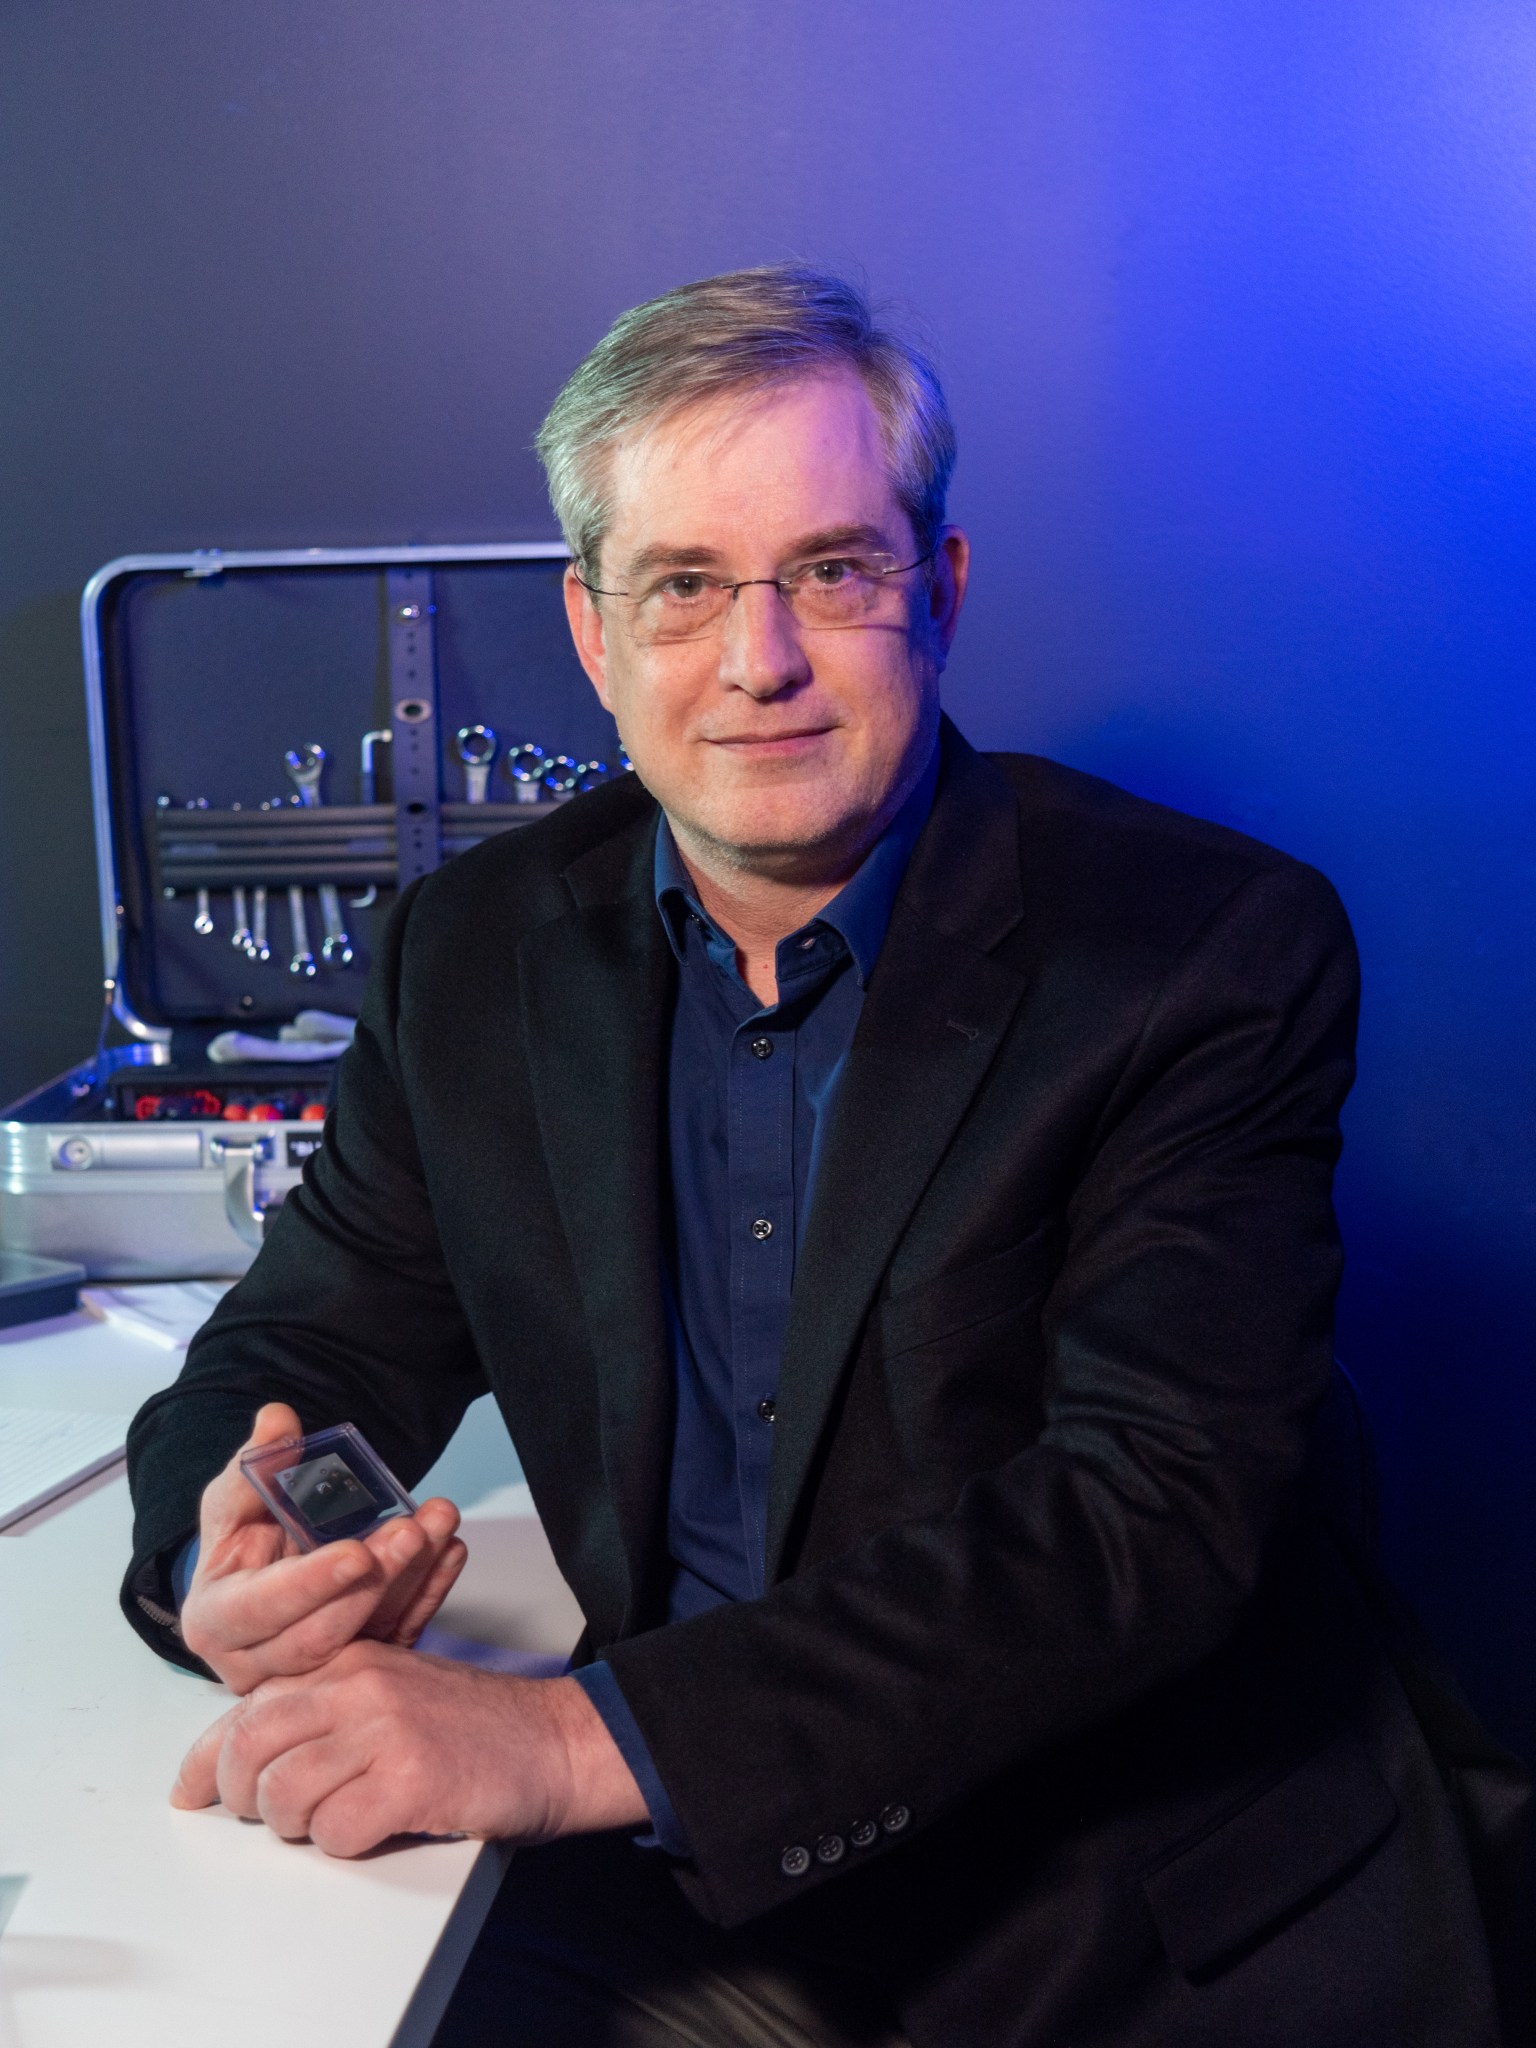 A man in black jacket and dark blue shirt sits at a desk, holding a small rectangle encased in clear covering. Behind him to his left, a toolbox sits open on the desk, and the wall is lit with a blue hue that fades to gray and black.